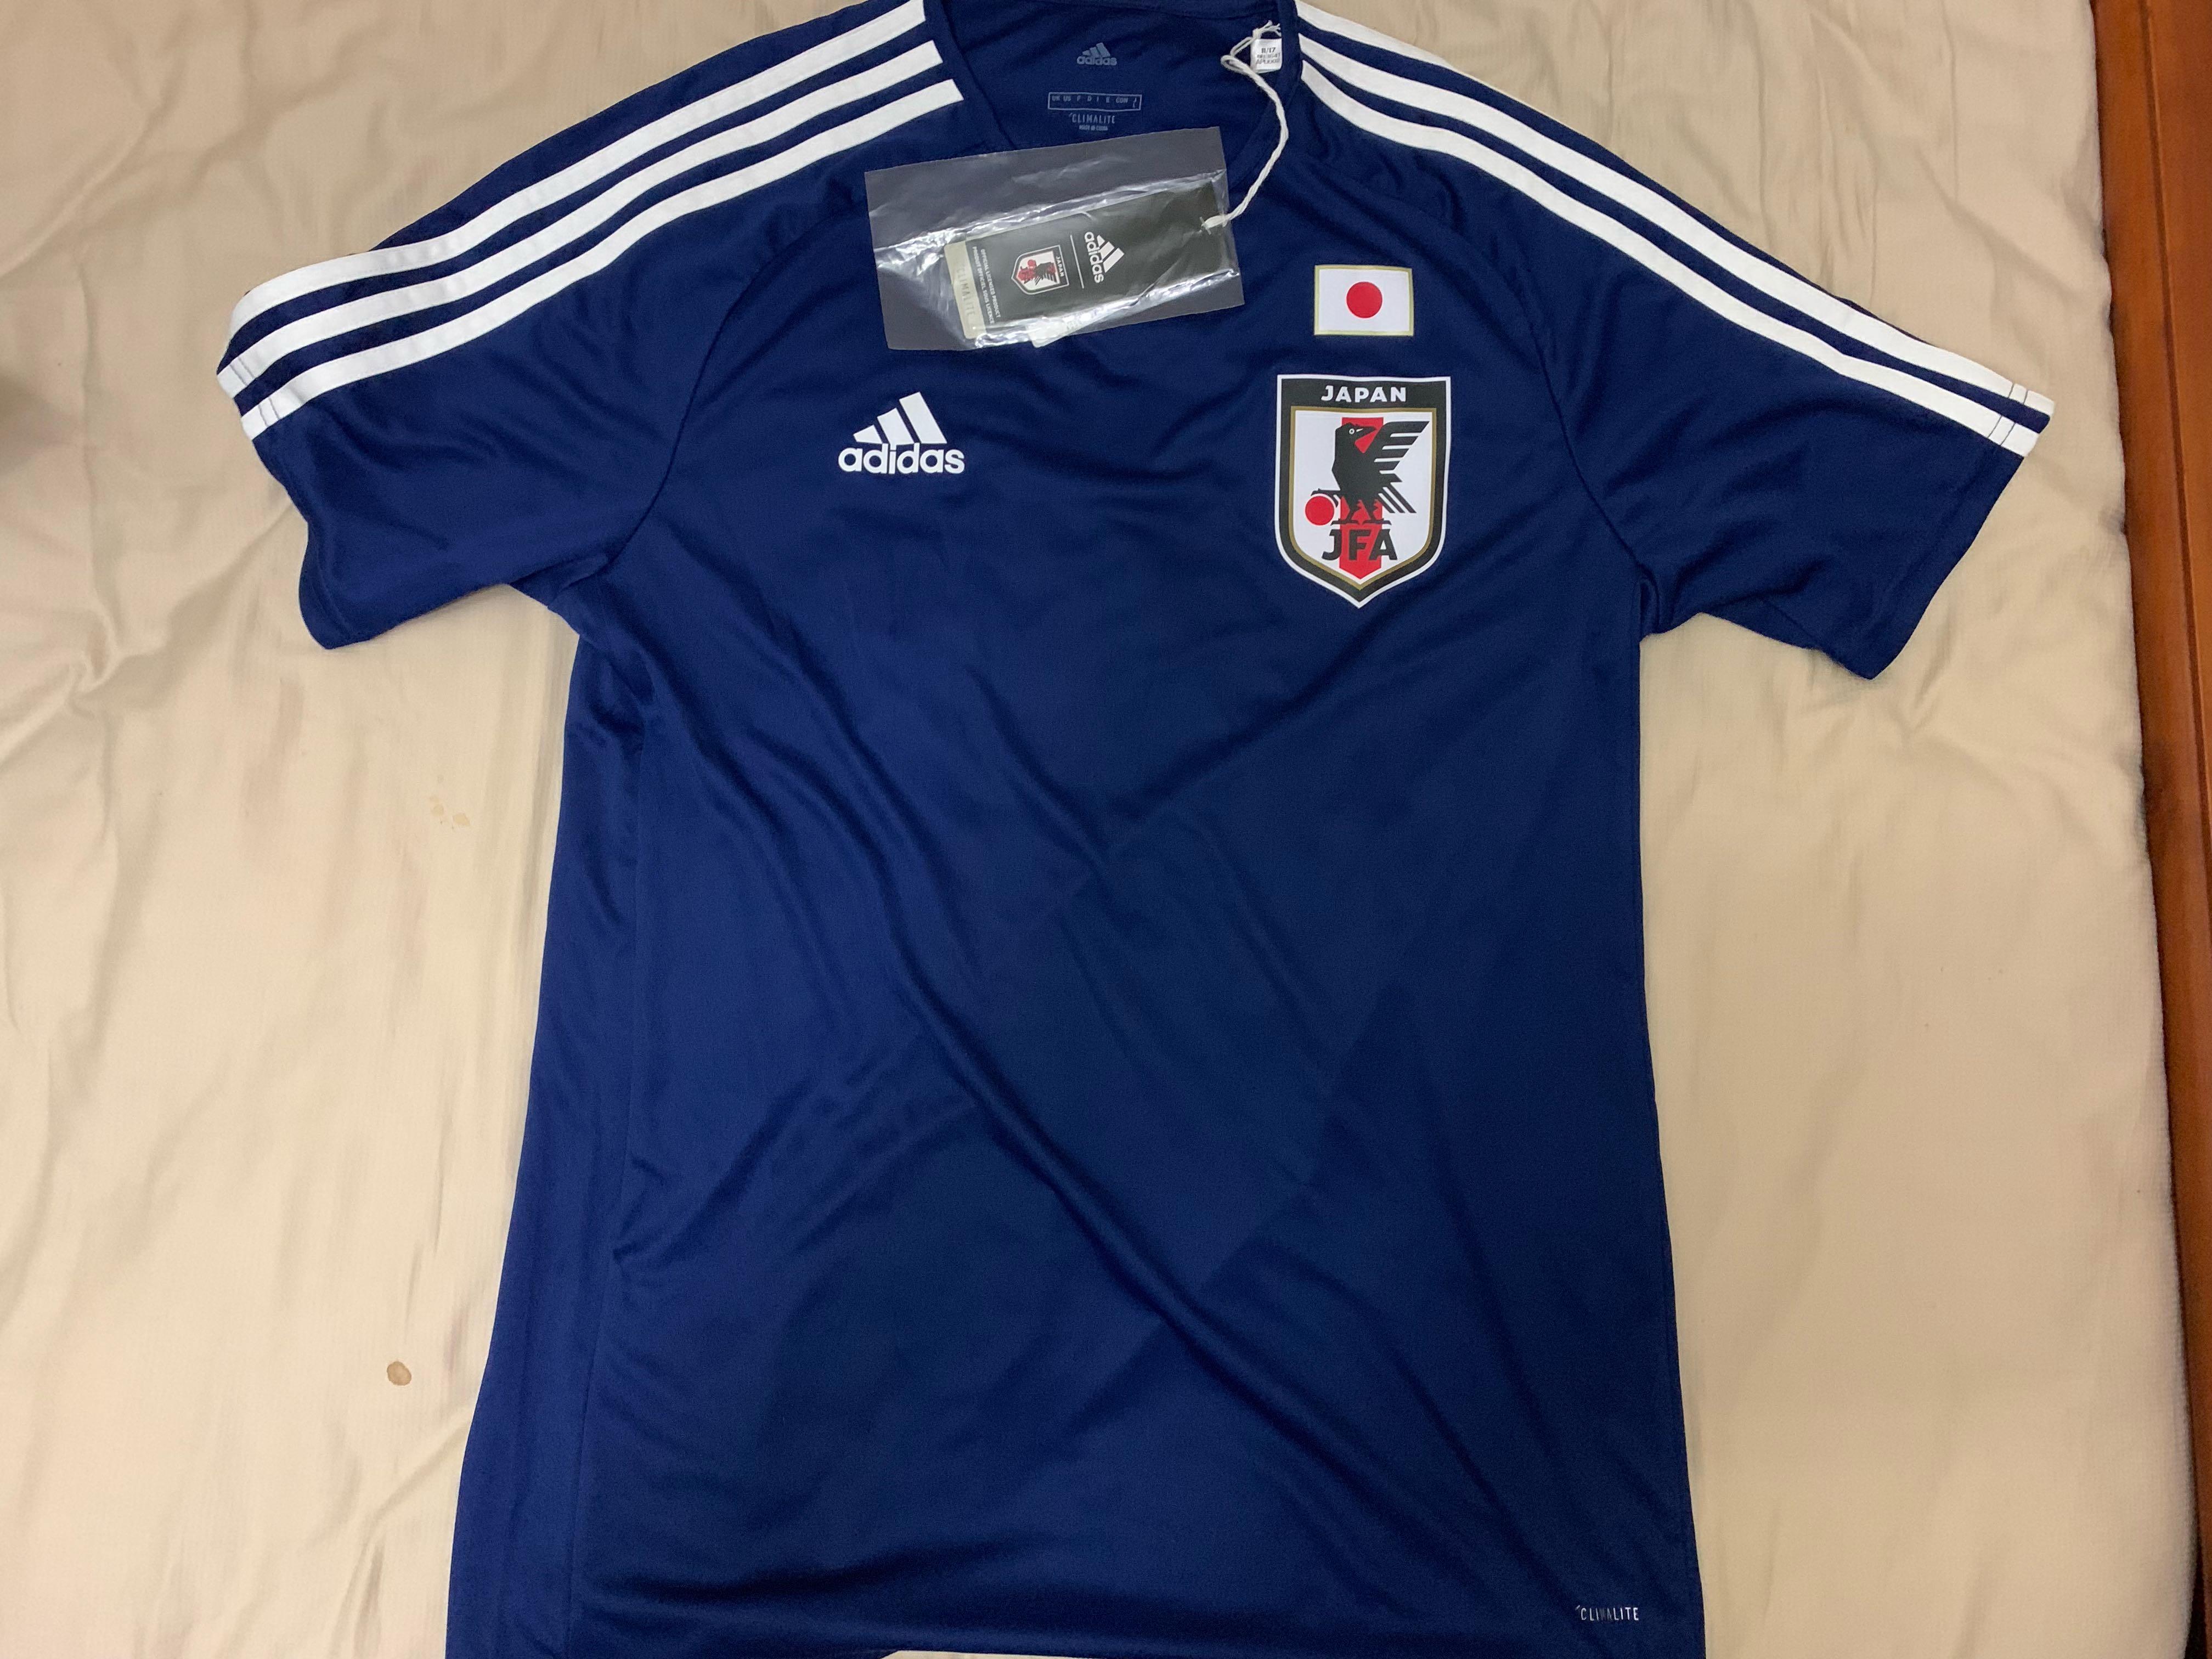 12-13 L/s Japanese National team away jersey formotion player issue shirt